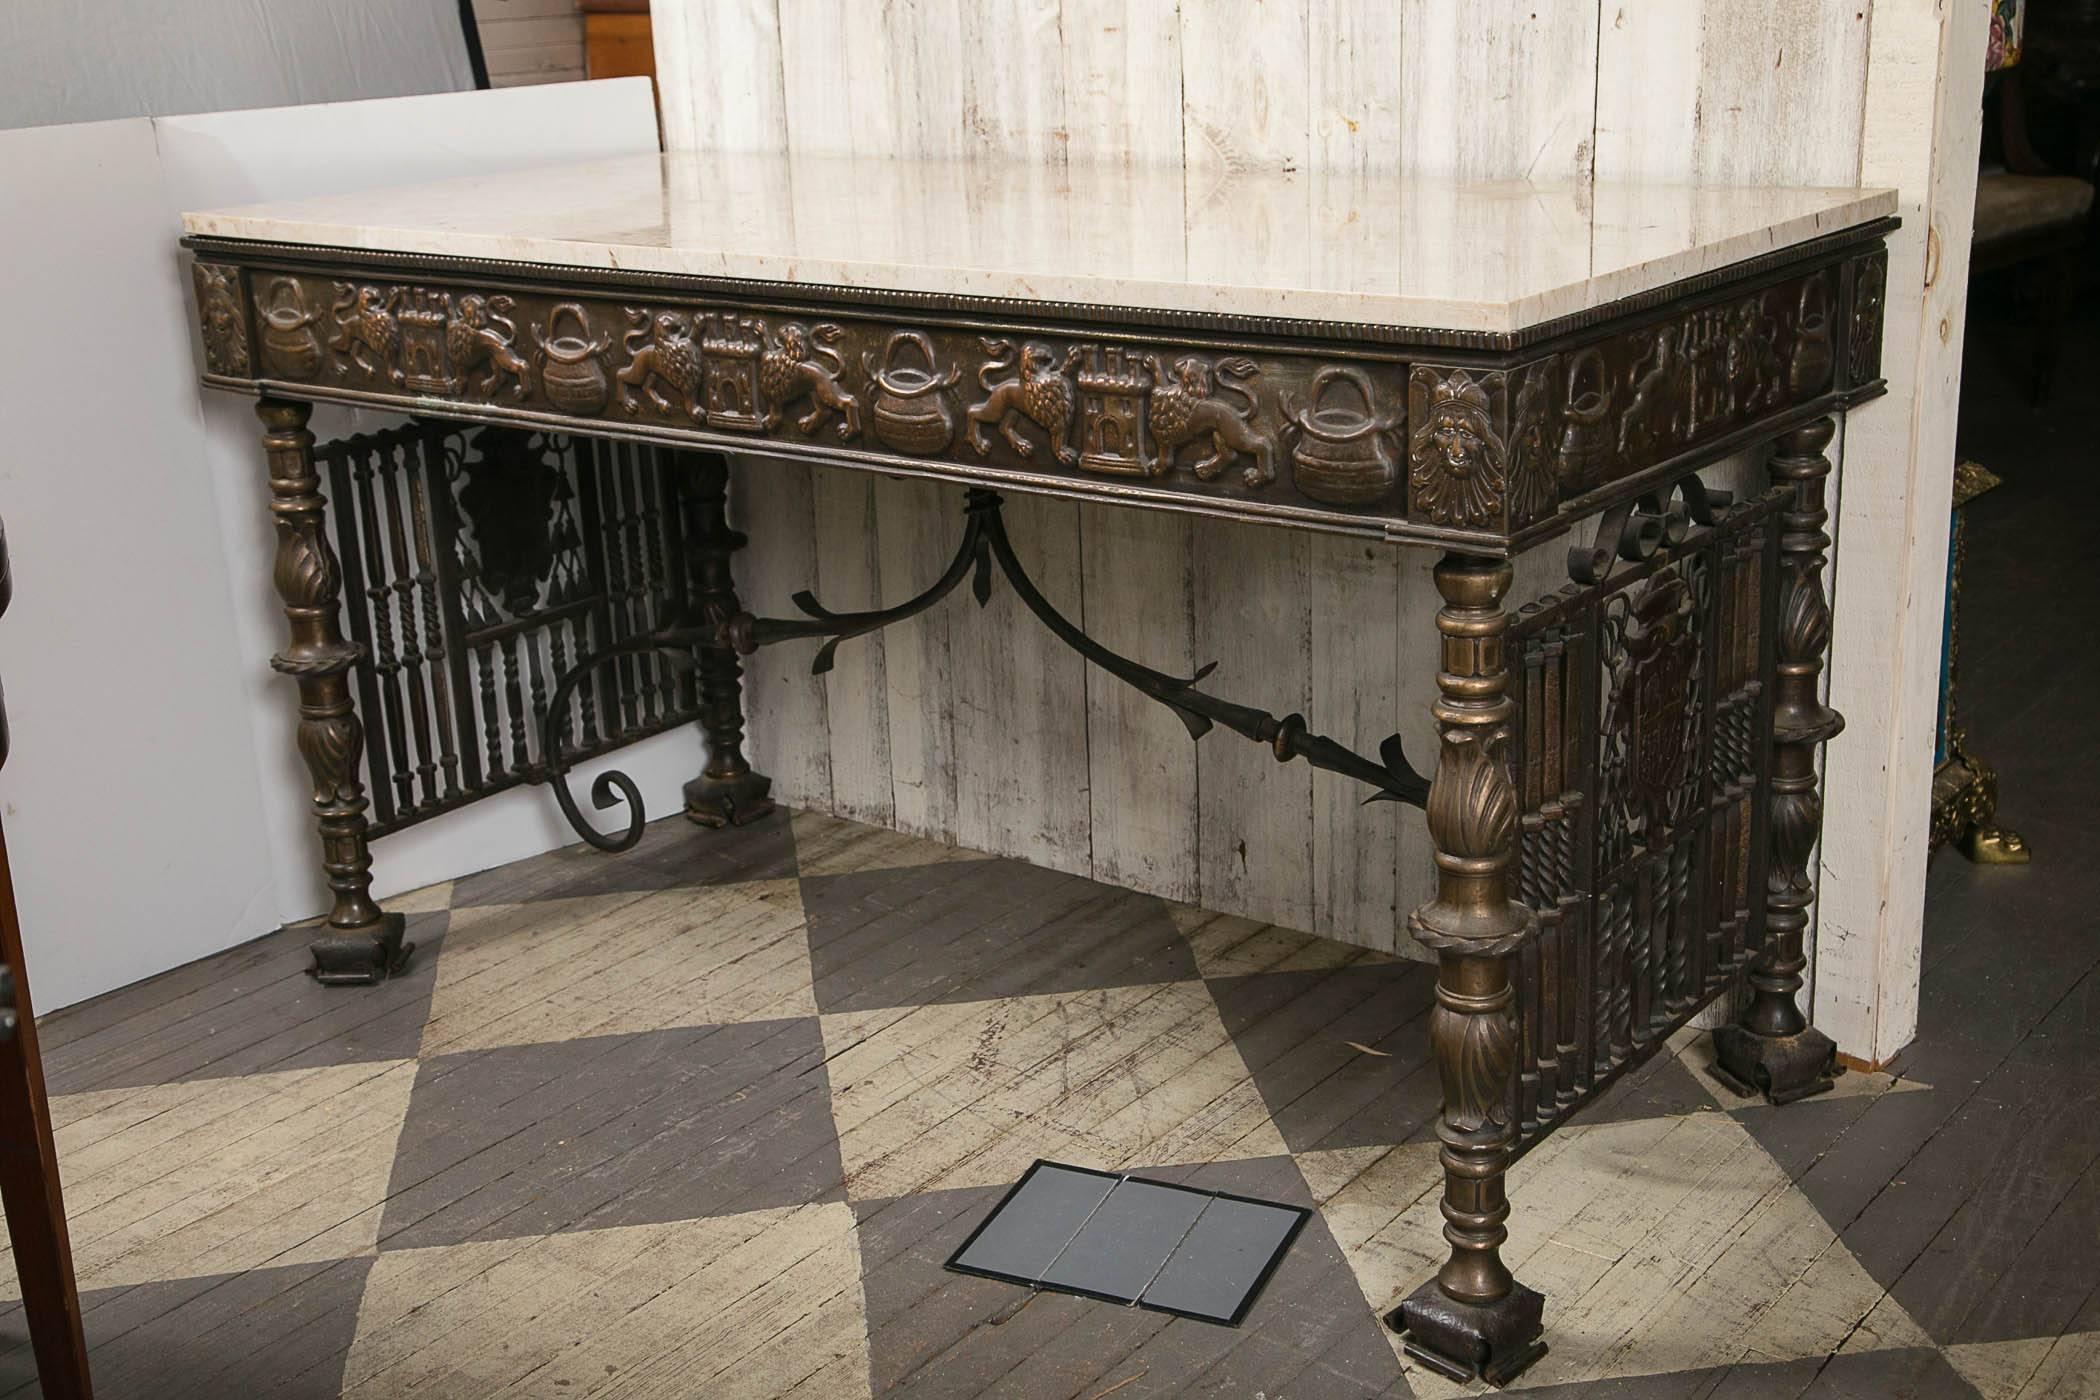 This table was possibly made by Oscar Bach. It is decorated all around to be used as a center table, but can also be a console or serving table. The tan marble is squared edged. The frieze is decorated with in repousse. The end vertical bars are of